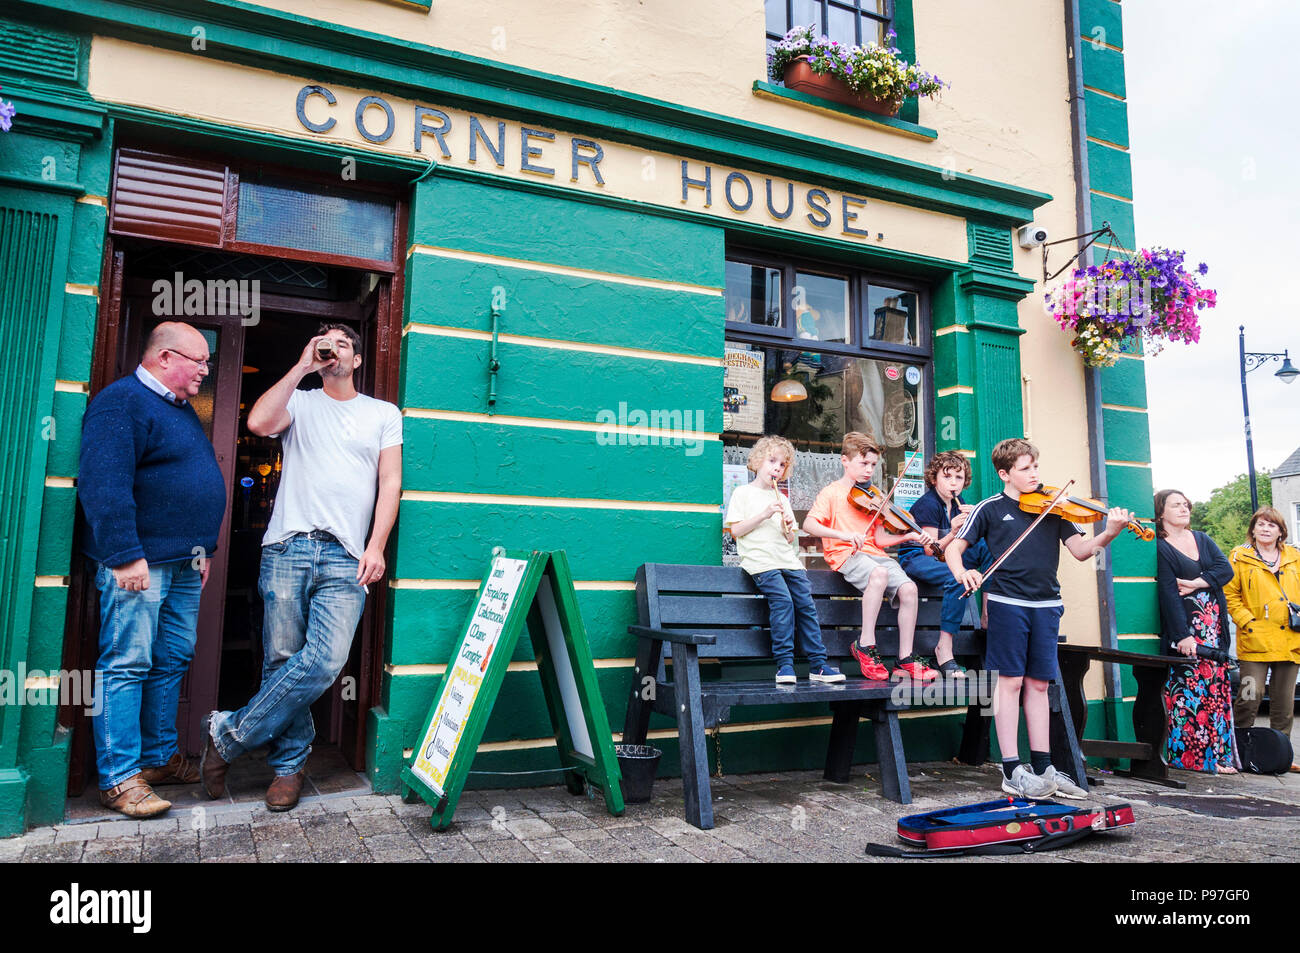 Ardara, County Donegal, Ireland. 15th July 2018. Young musicians keep up the traditions in the street outside of a bar in Ireland's north-west. Traditional Irish music has a long history here. Credit: Richard Wayman/Alamy Live News Stock Photo